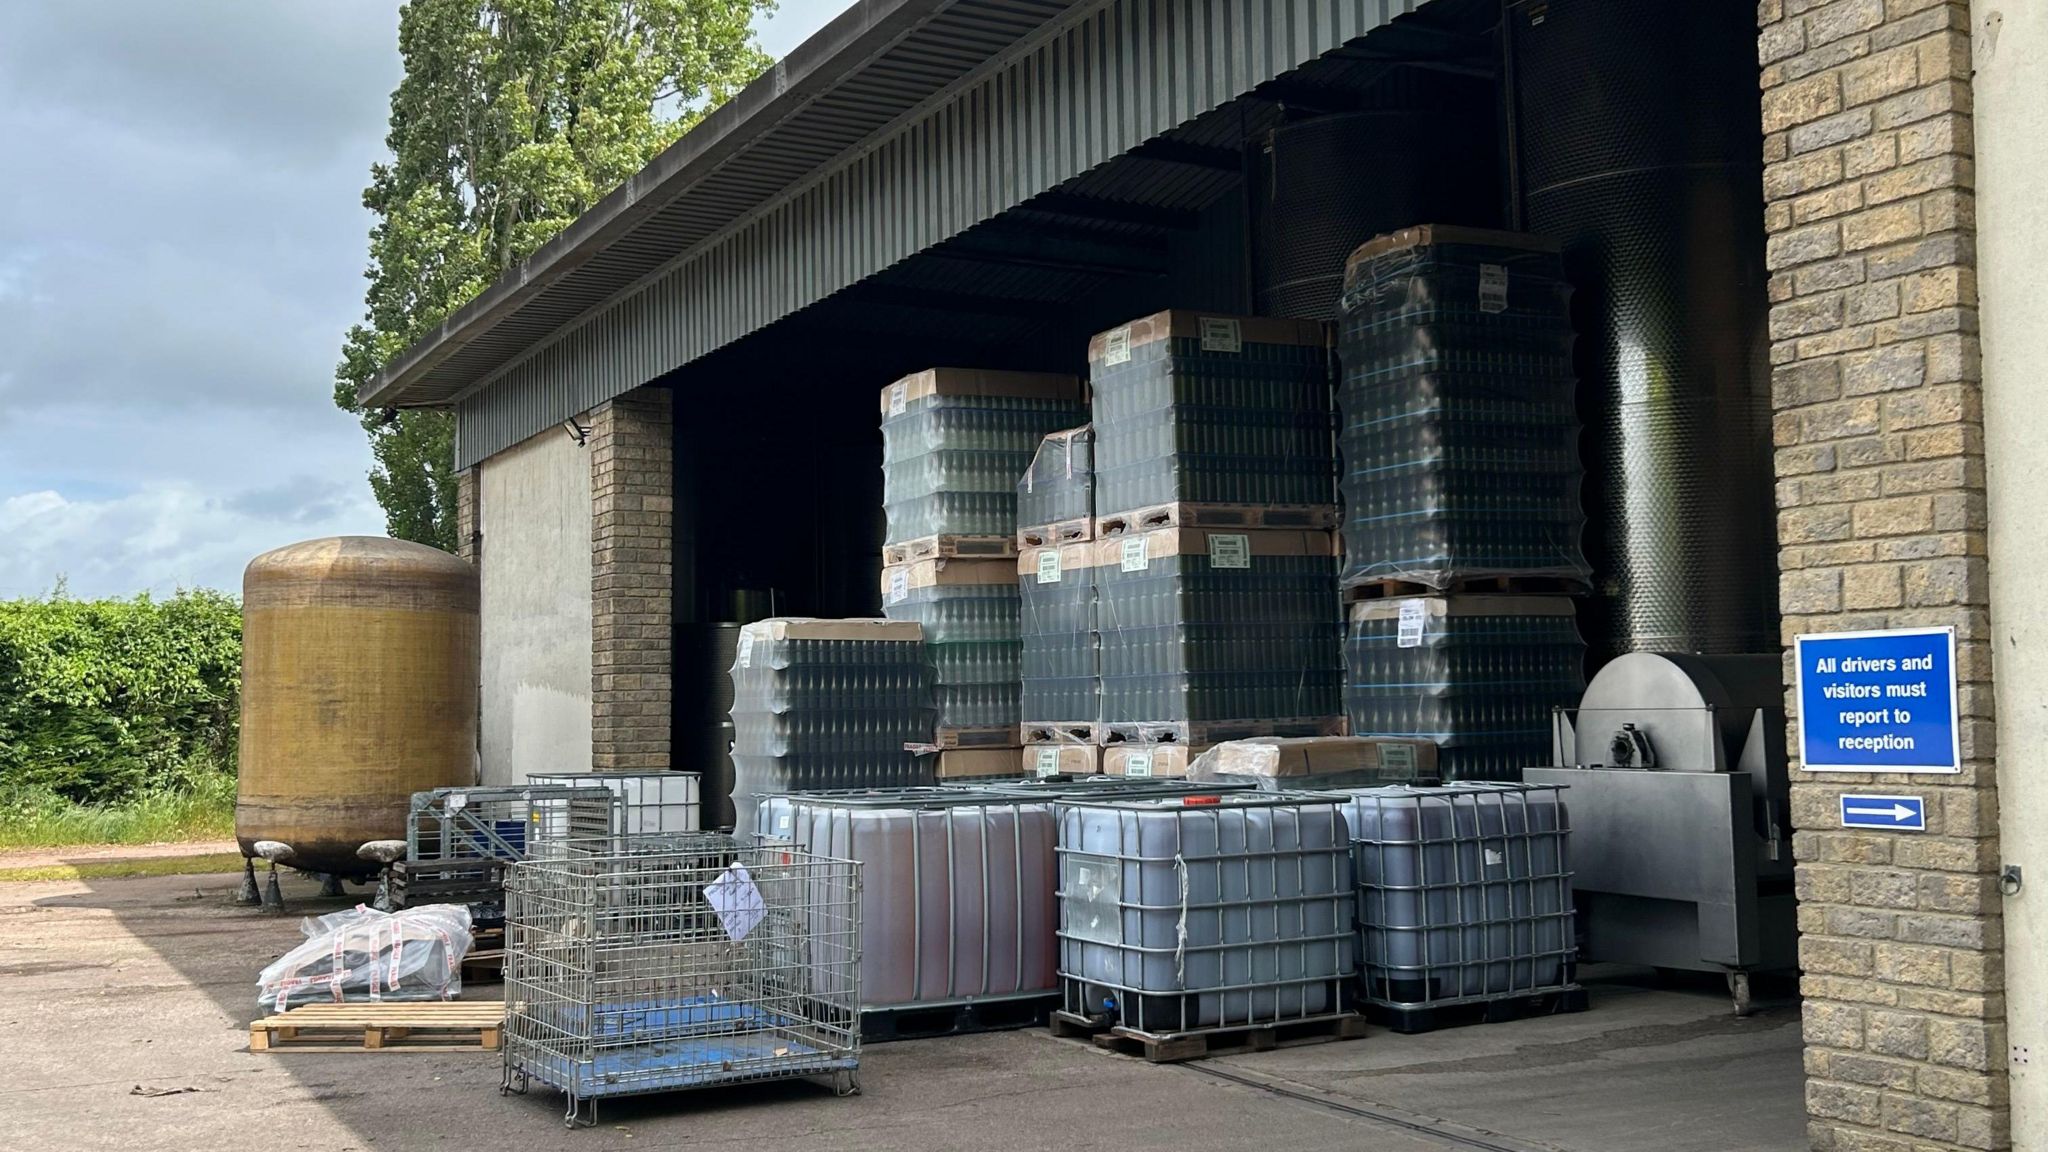 A warehouse shed full of crates of wine bottles and vats of wine